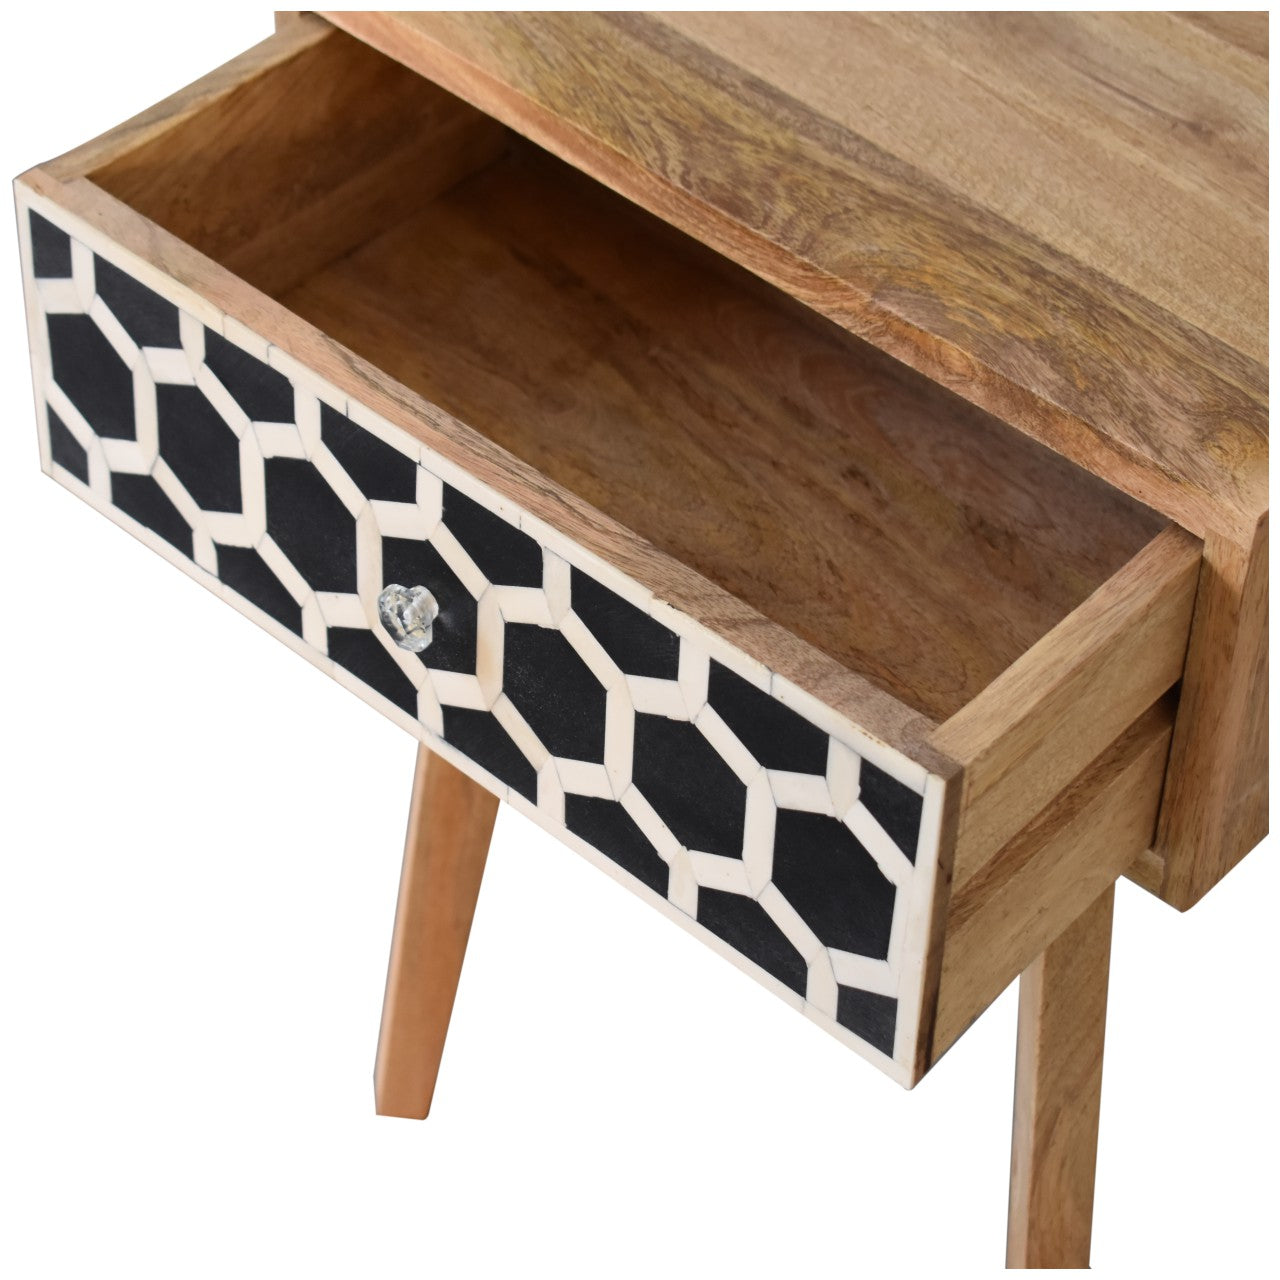 Bone Inlay Tapered Bedside